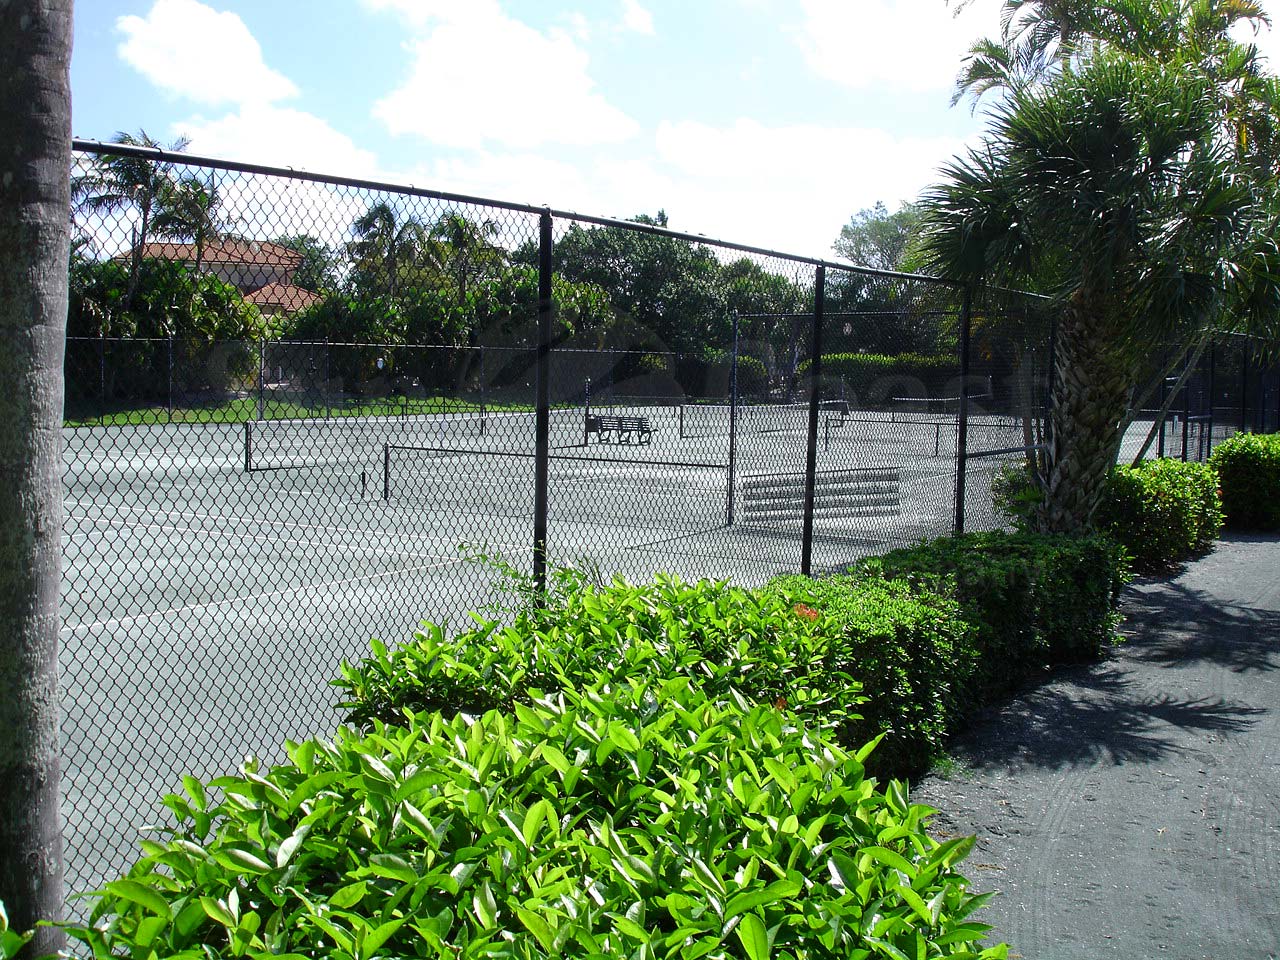 Twin Dolphins Shared Tennis Courts with La Peninsula